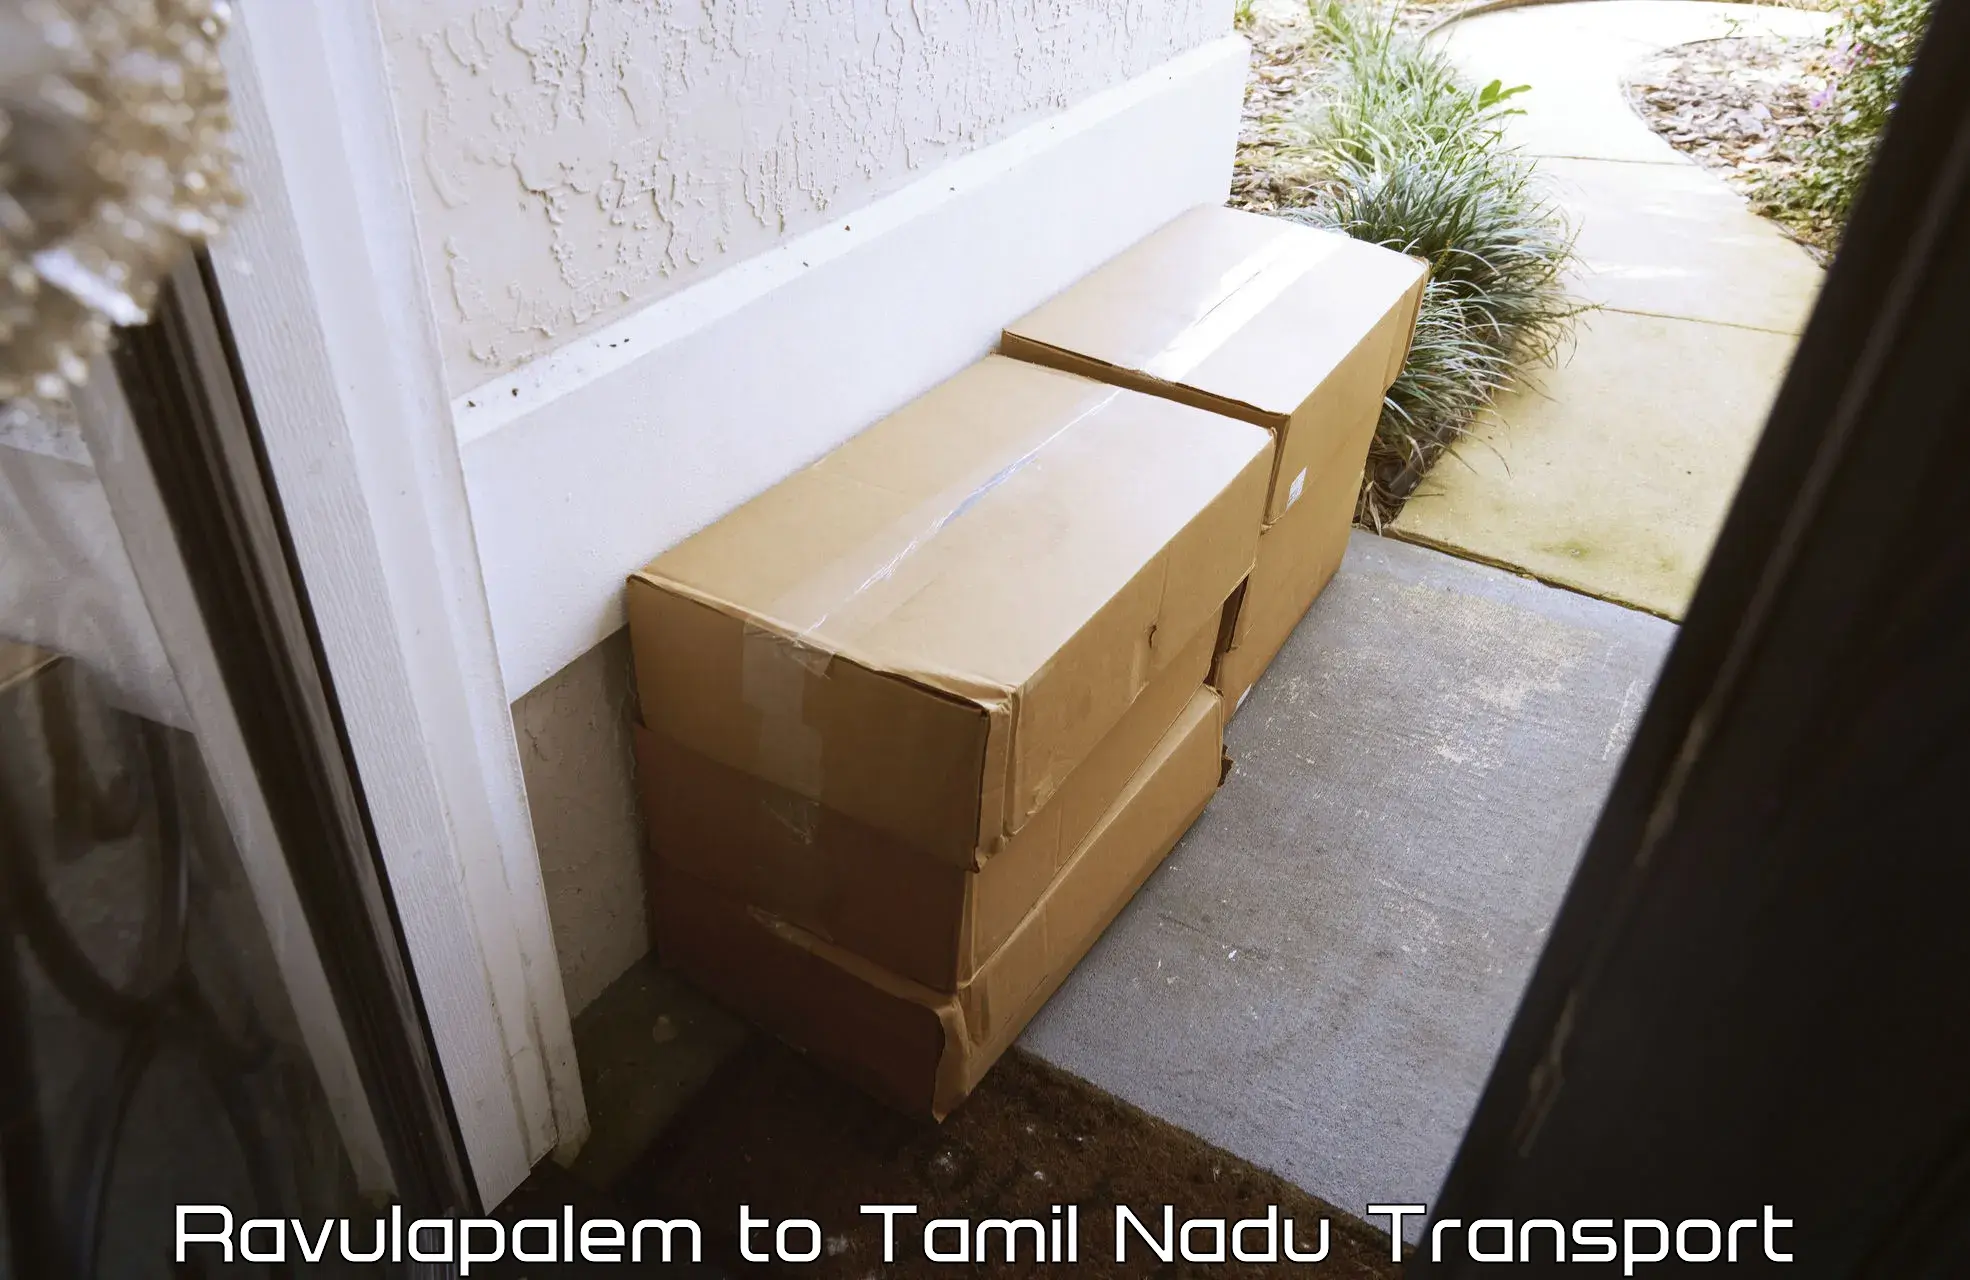 Domestic goods transportation services Ravulapalem to Meenakshi Academy of Higher Education and Research Chennai